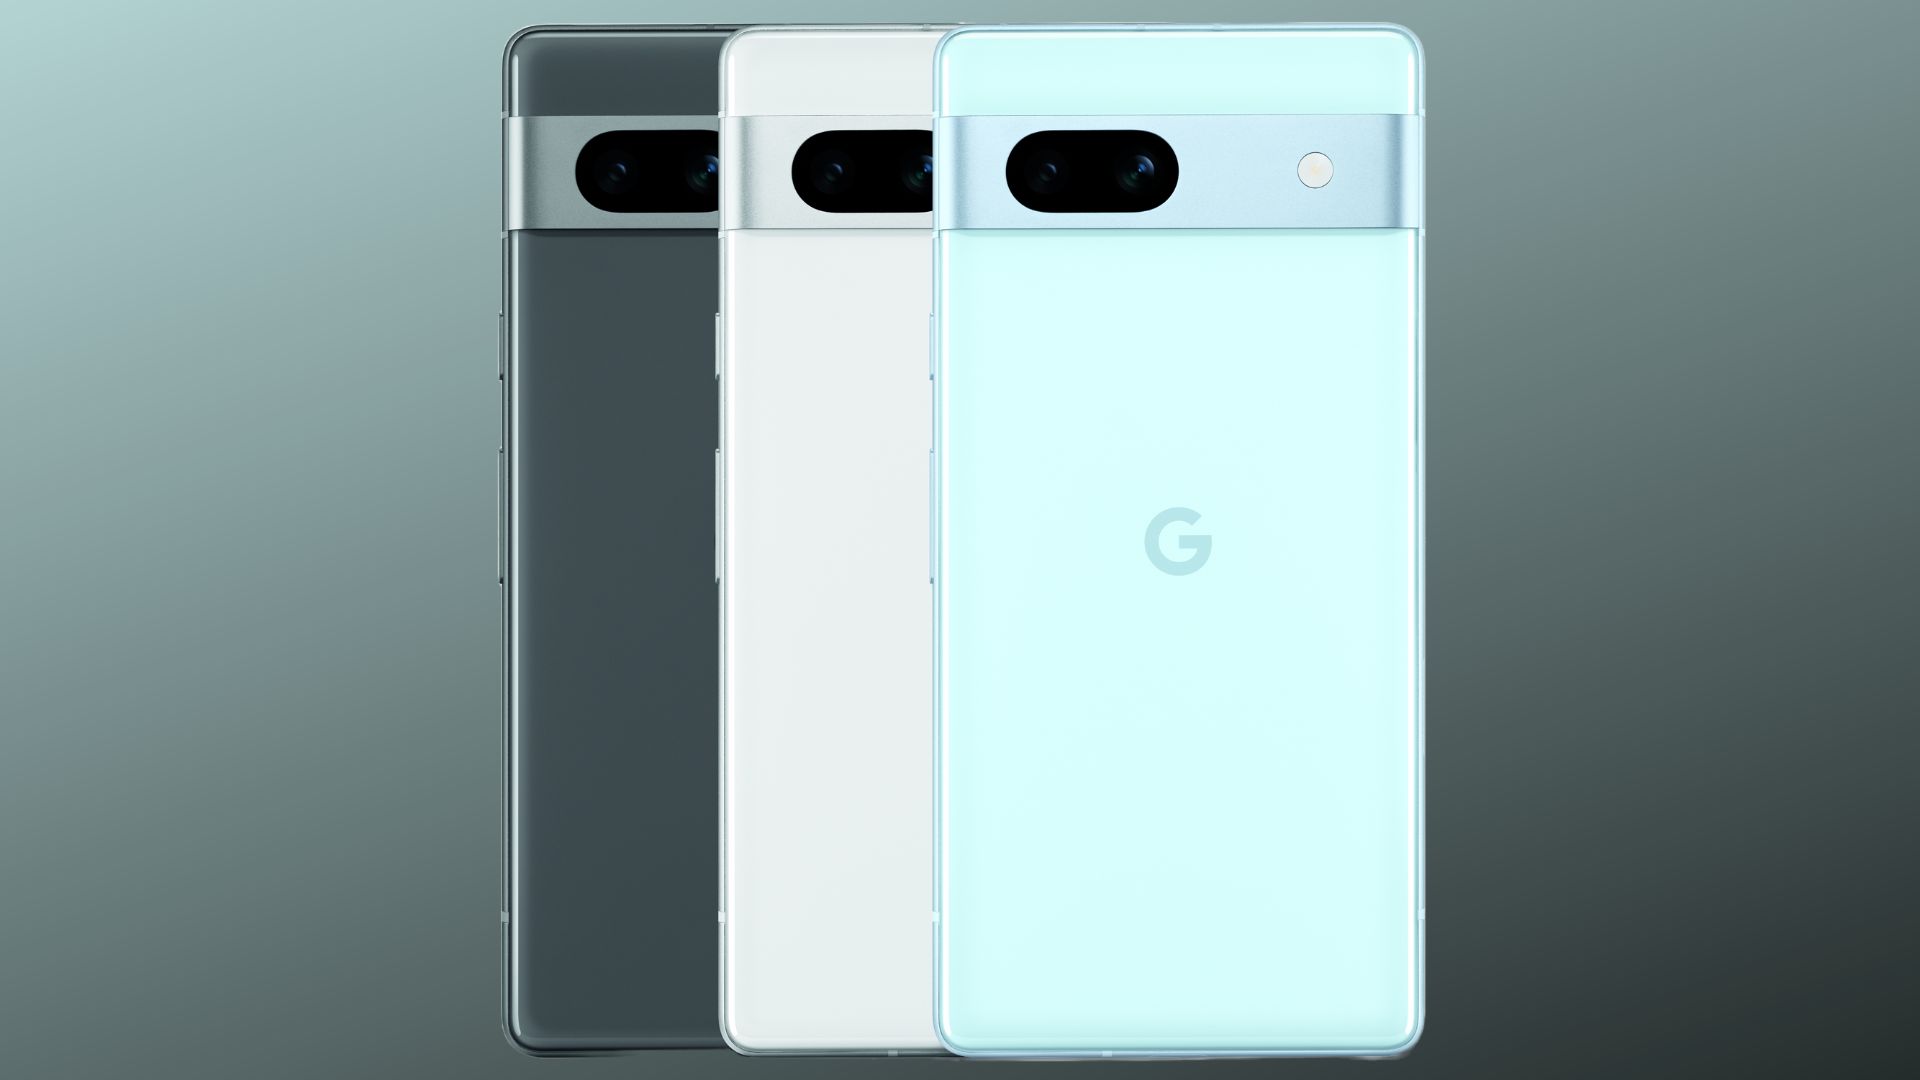 Pixel 7a colors in grey, silver, and light blue, according to Evan Blass.